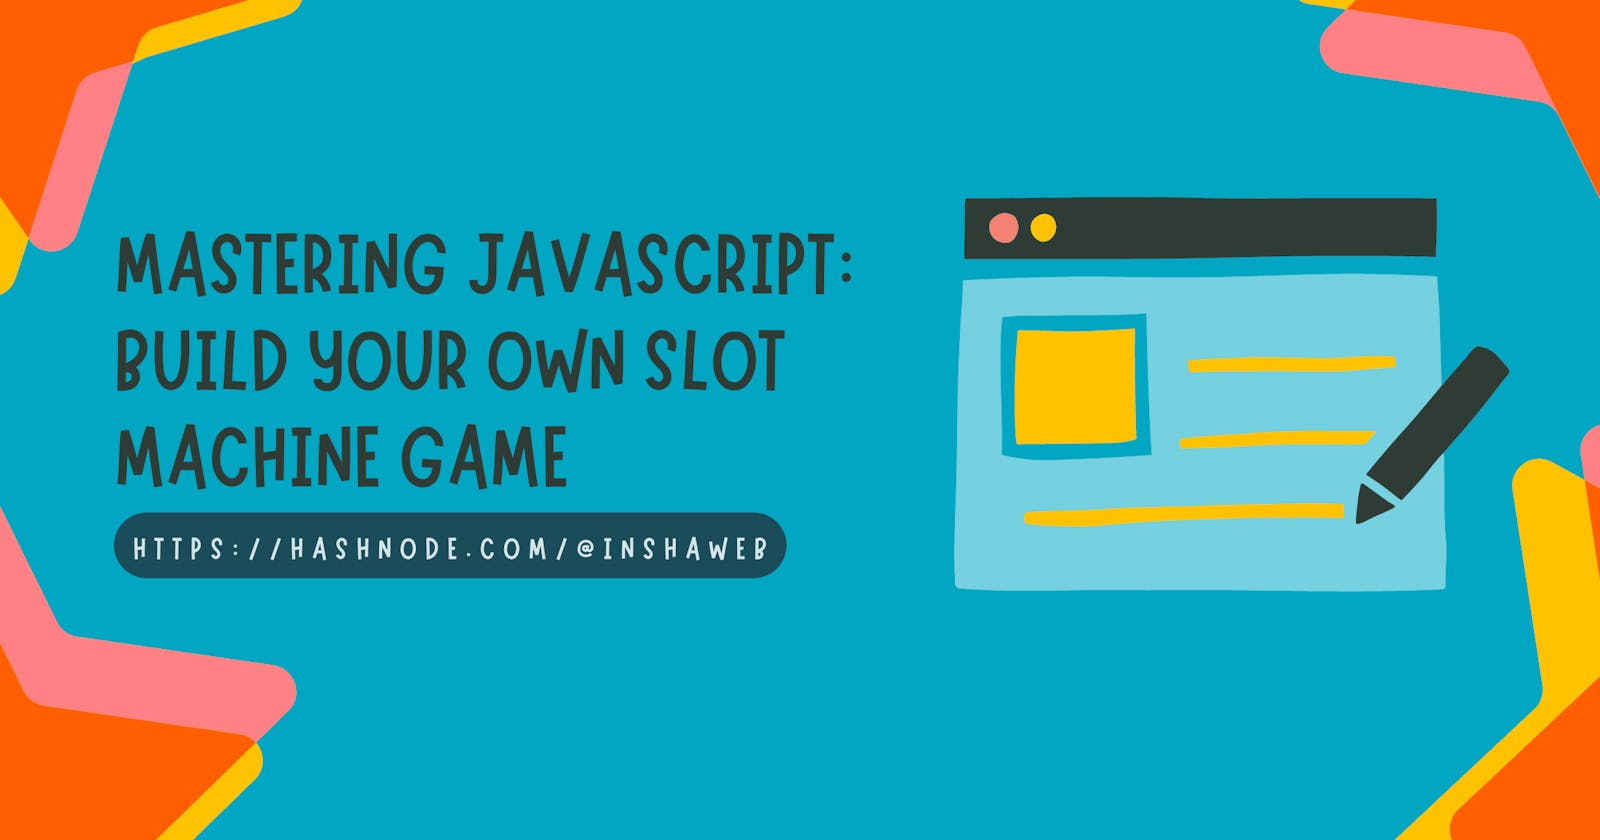 Mastering JavaScript: Build Your Own Slot Machine Game!